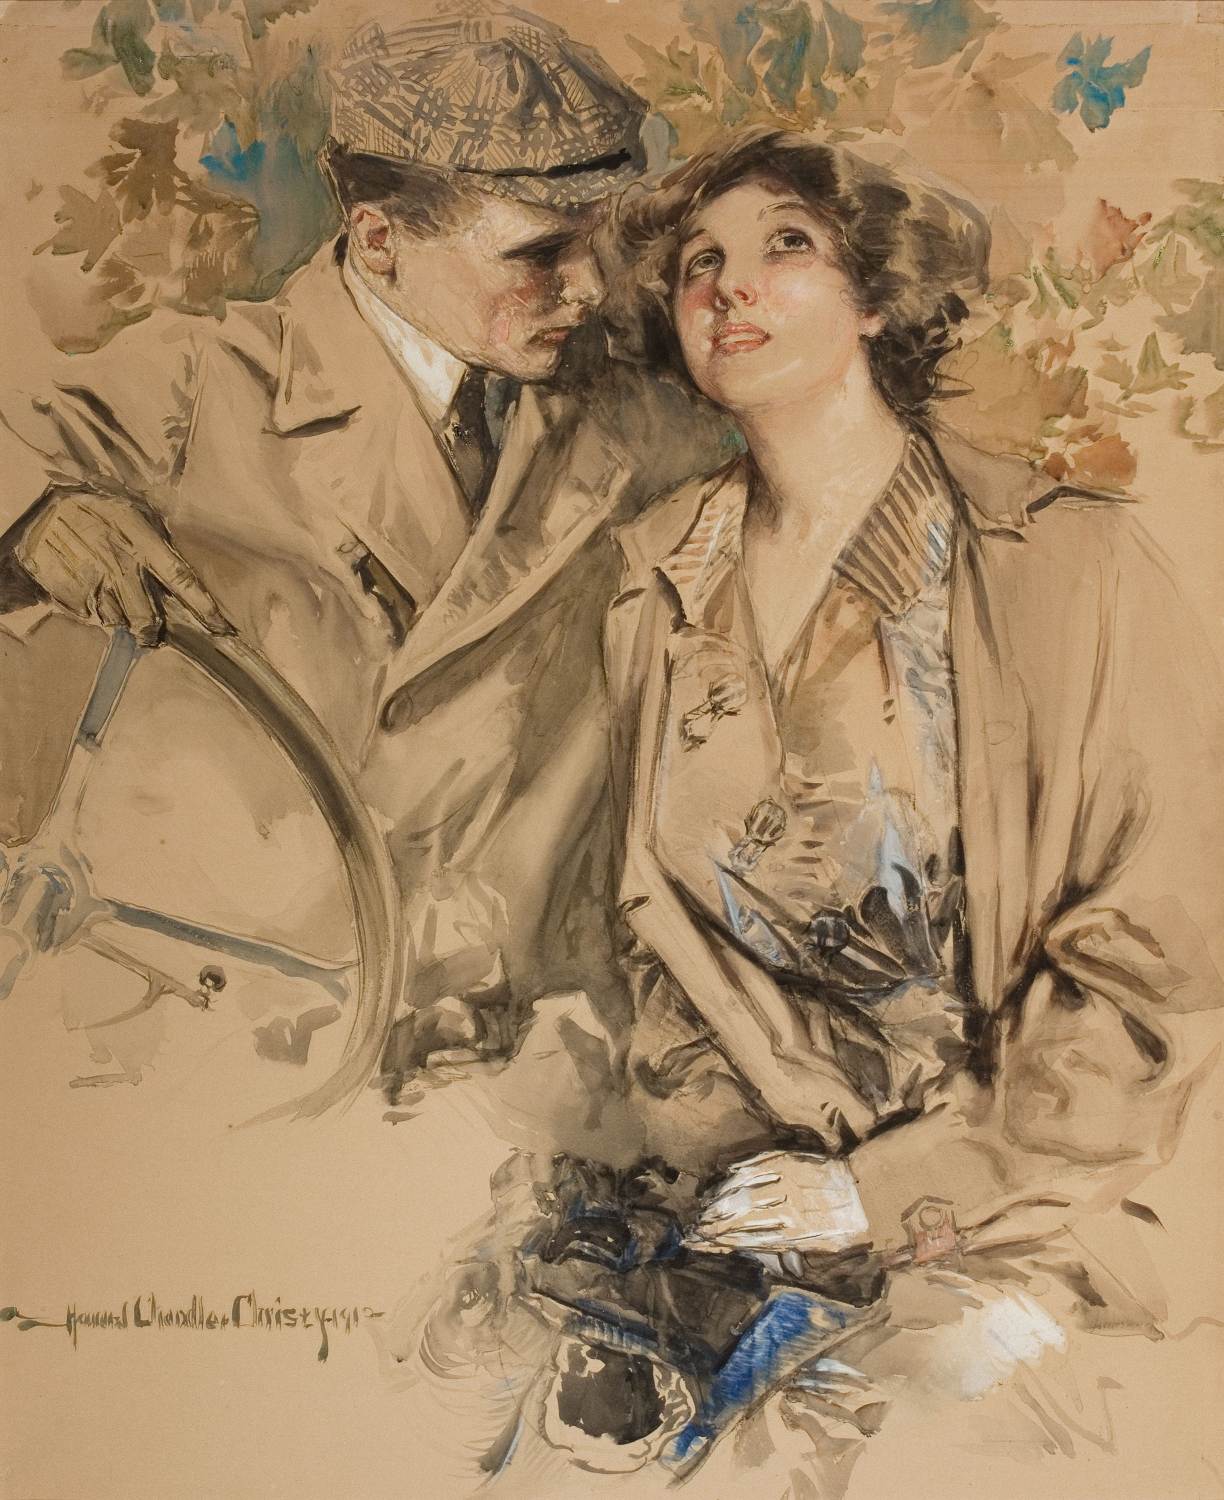 A Modern-Day Motoring Couple by Howard Chandler Christy, 1912